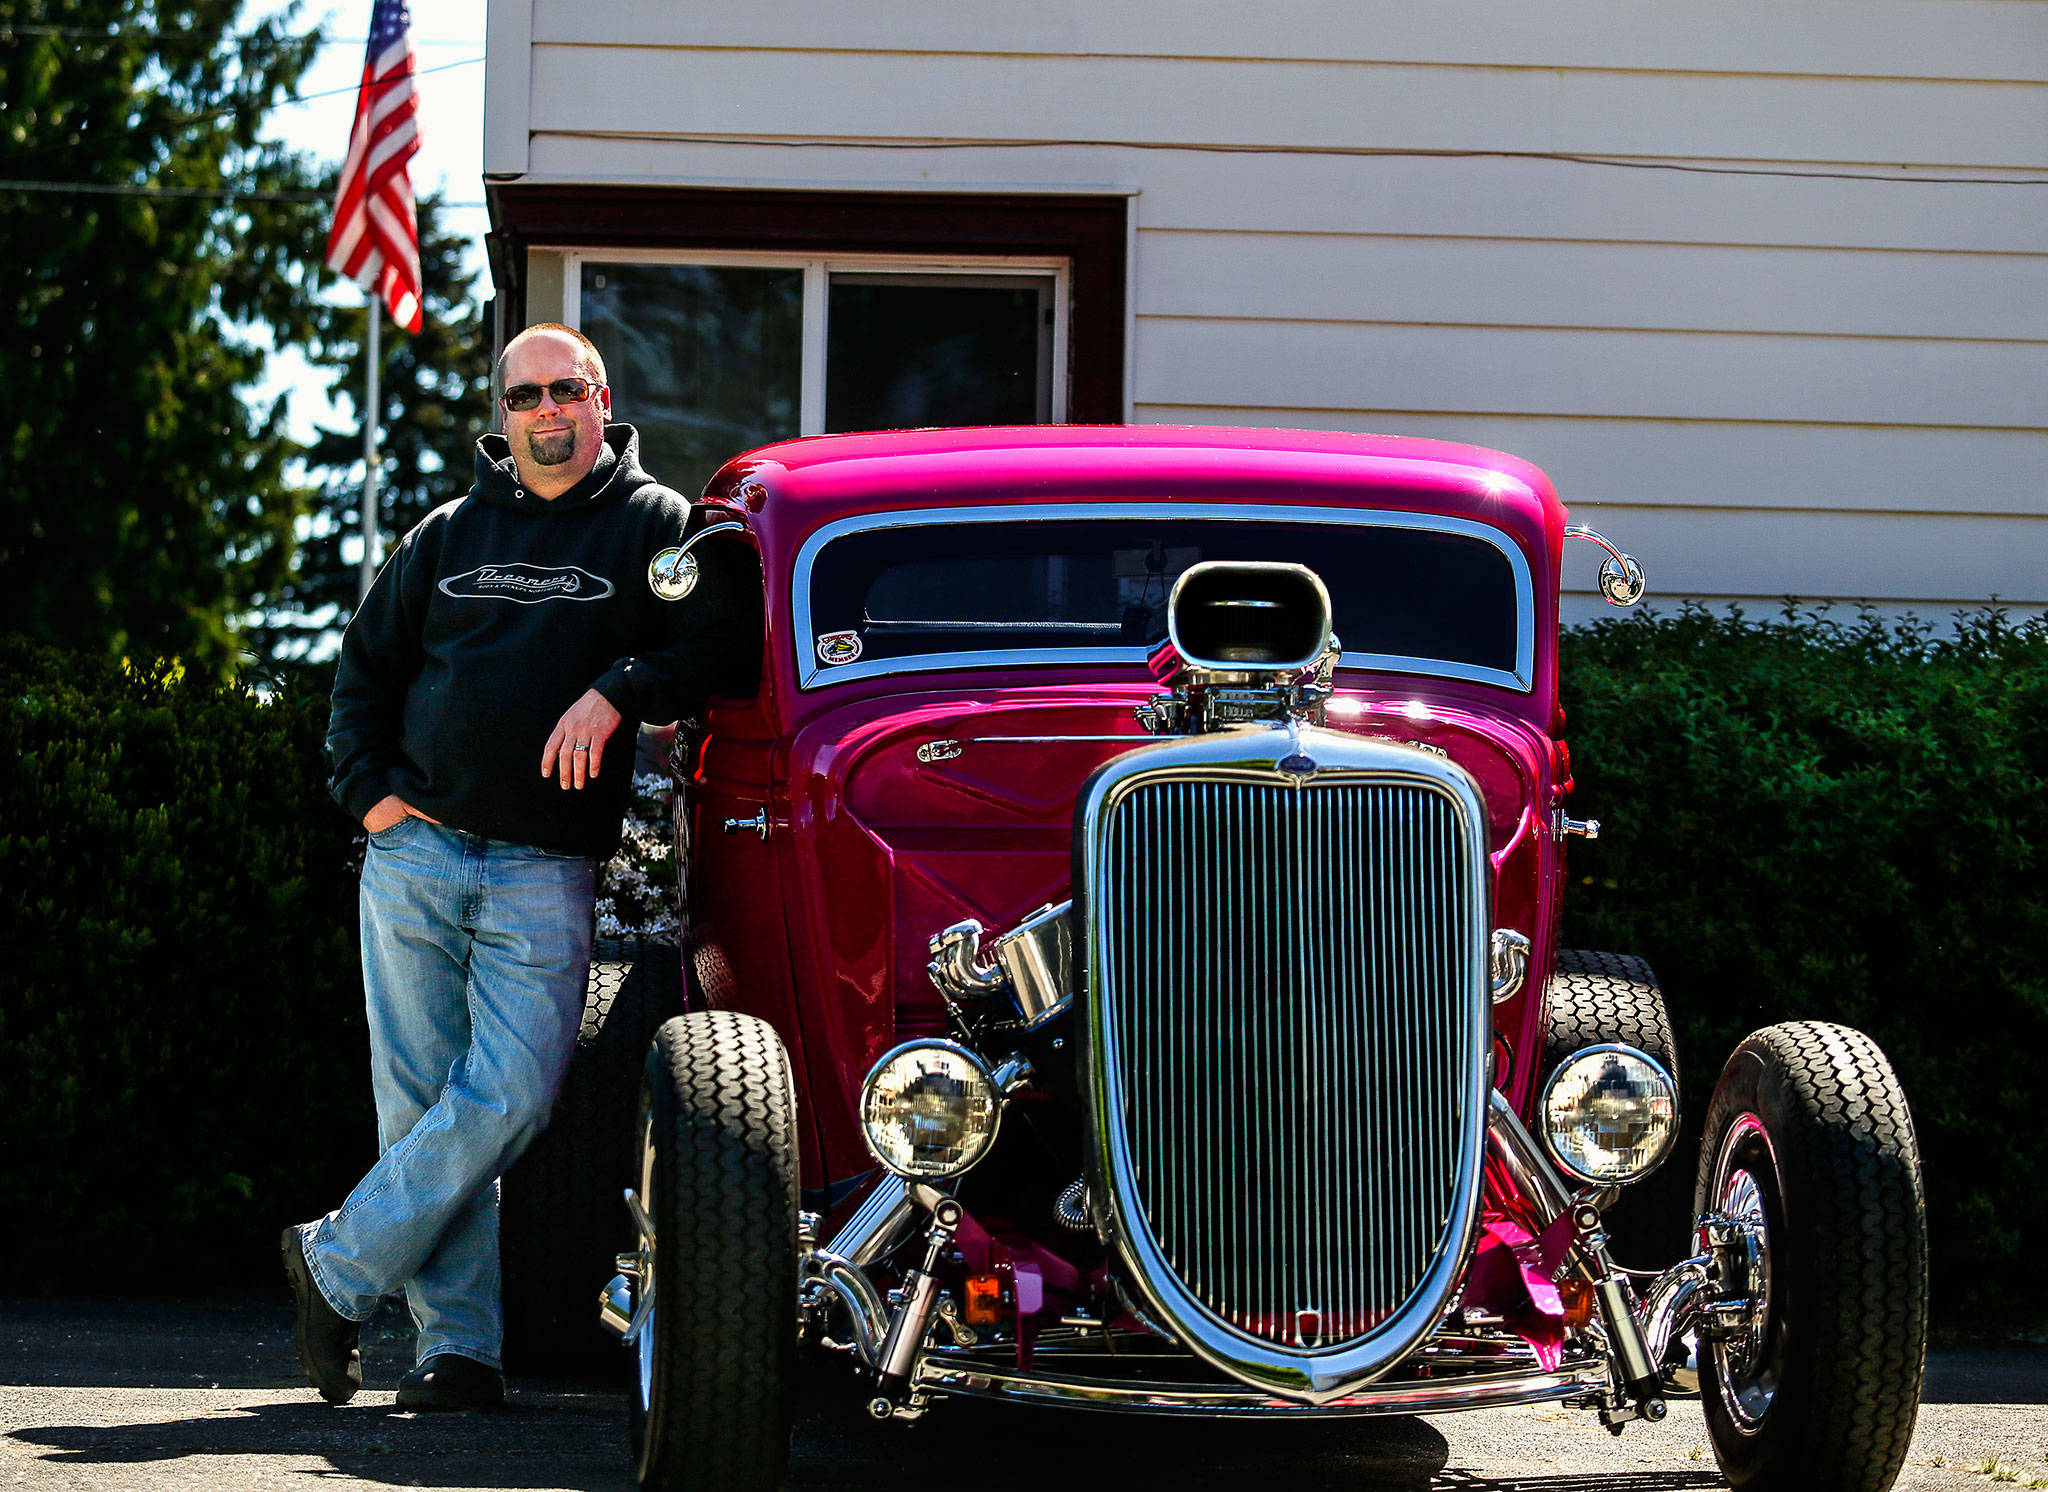 Troy Rimstad’s replica 1934 Ford three-window coupe will be part of Cruzin’ to Colby, the annual celebration of vintage and specialty cars this weekend in downtown Everett. (Dan Bates / The Herald)